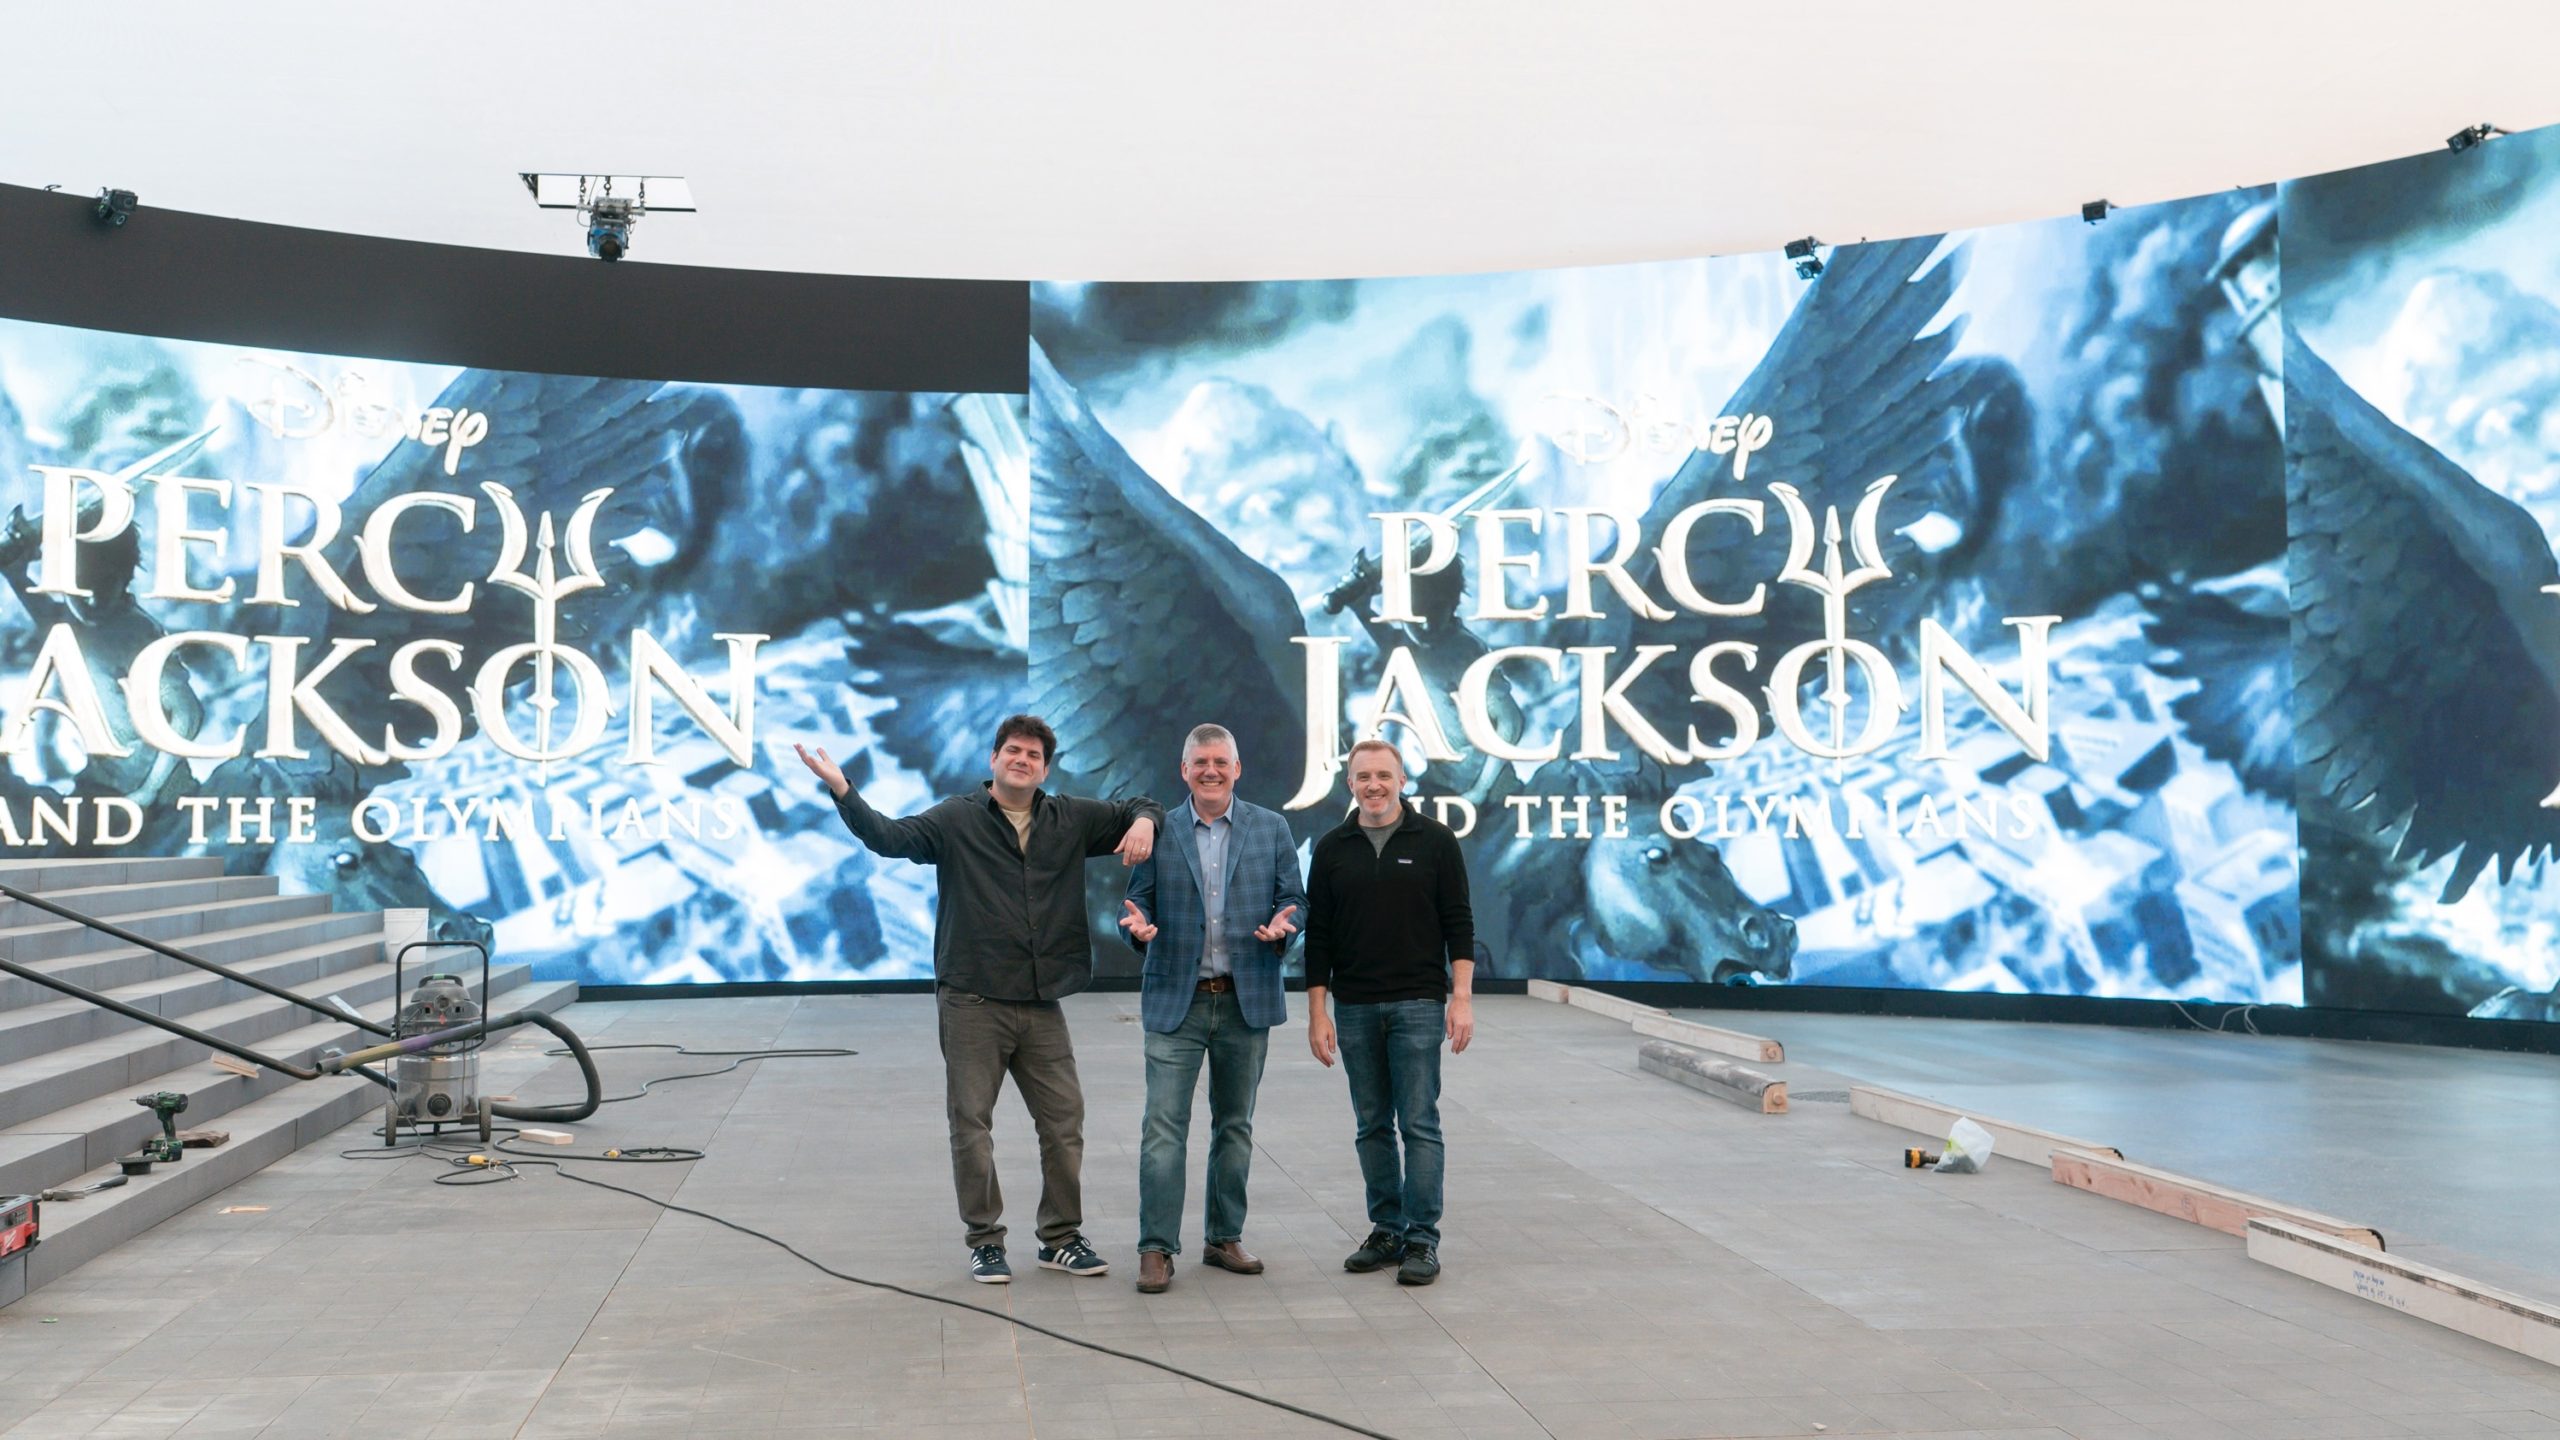 From left to right, Dan Shotz, Rick Riordan, and Jon Steinberg stand on a sound stage. Behind them, large screens show a portion of the cover of the first Percy Jackson book.